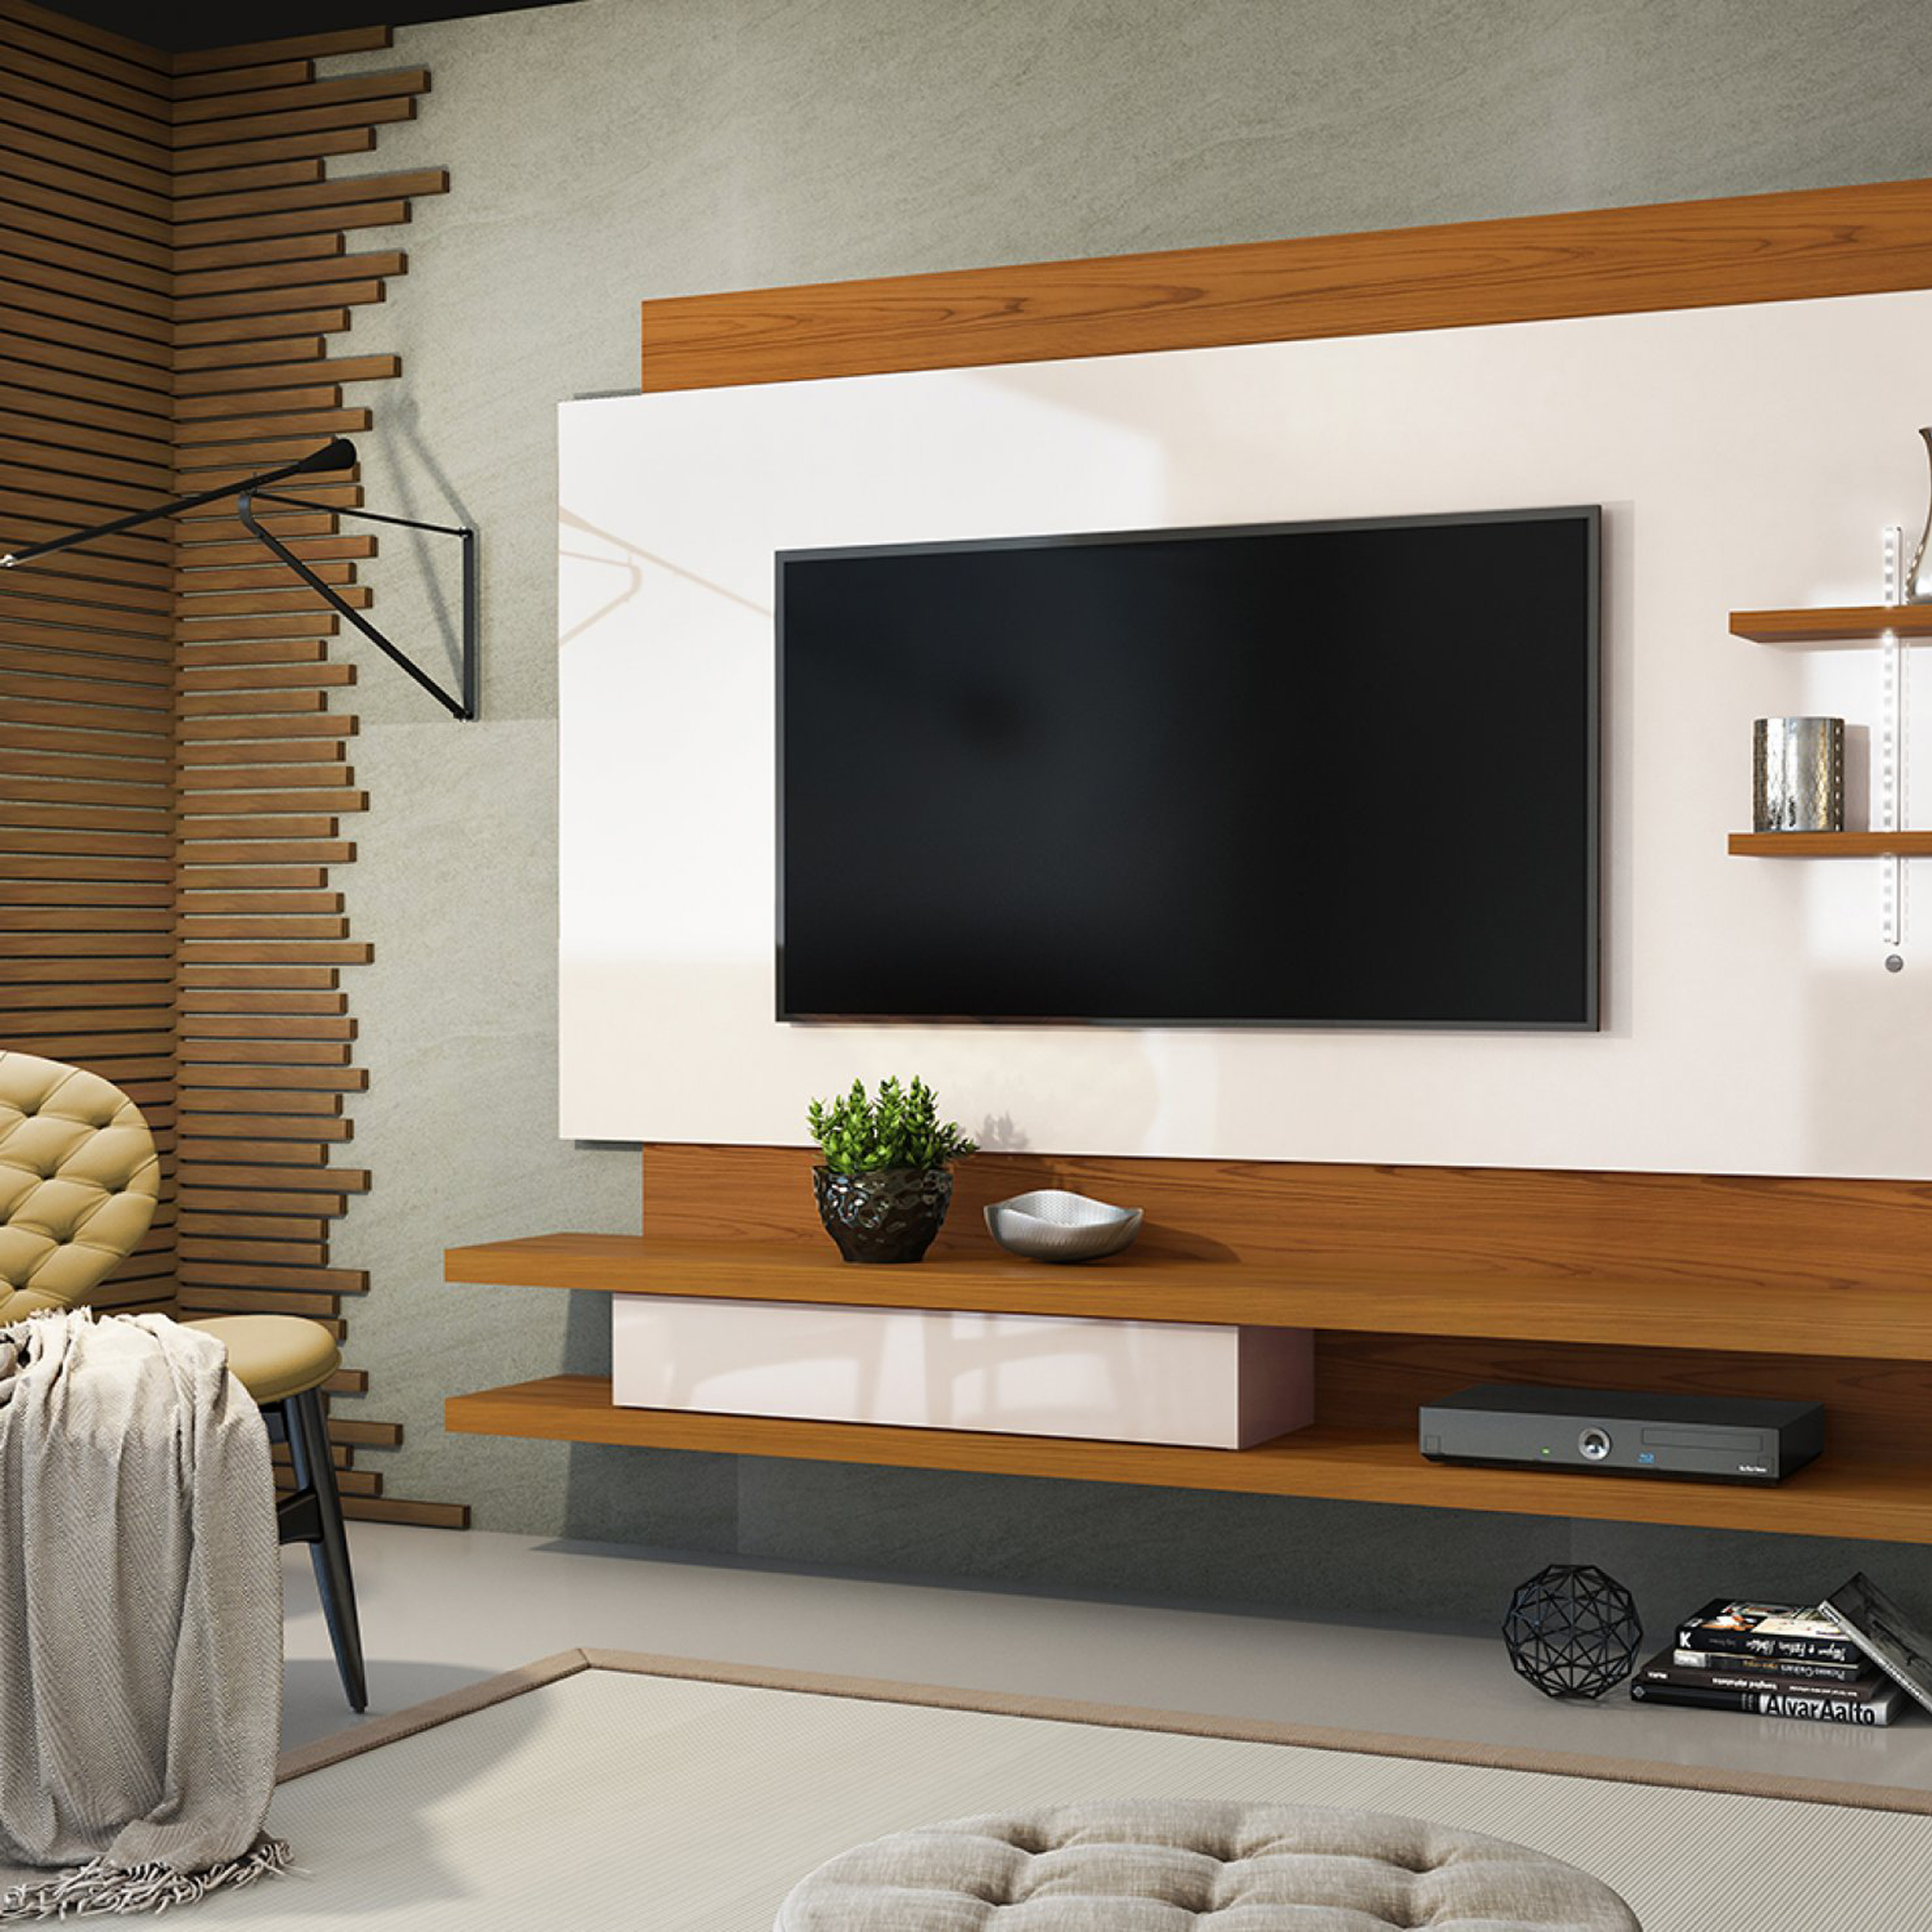 A floating TV unit - interior design for tv wall mounting modern built in tv wall unit designs electronic city bangalore